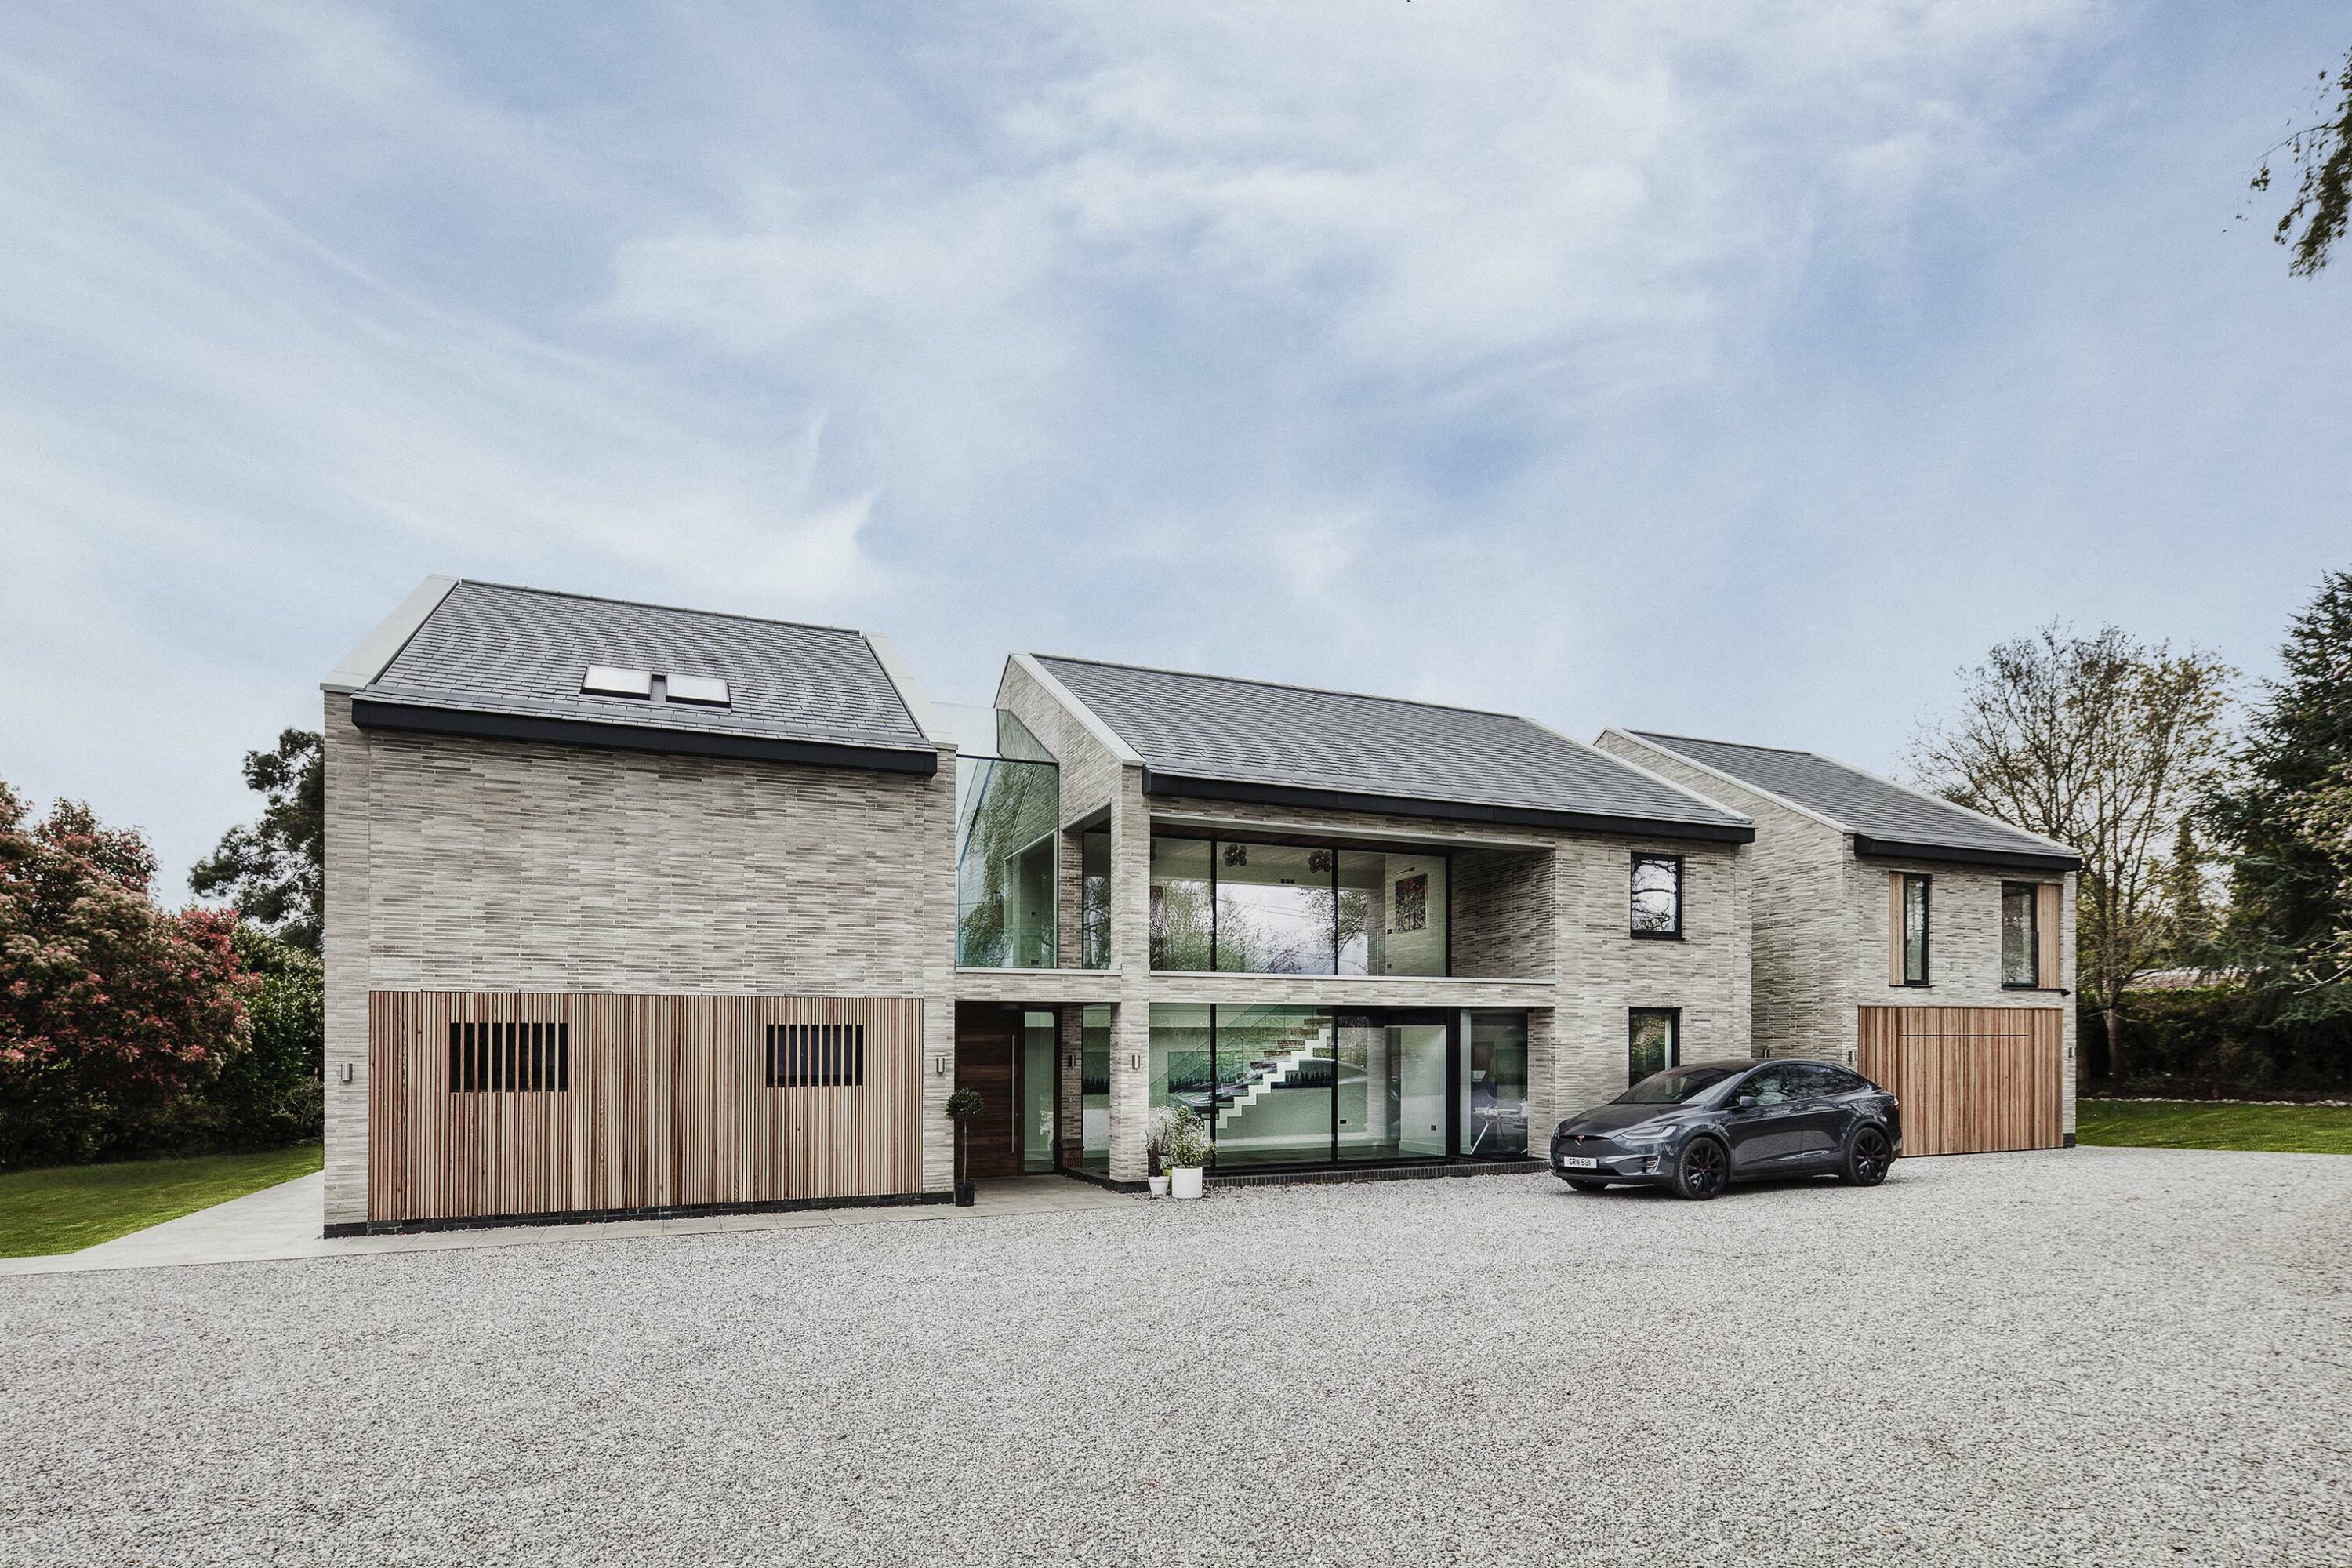 Stunning contemporary new build home near henley with glazed links and sustainable elements at the heart